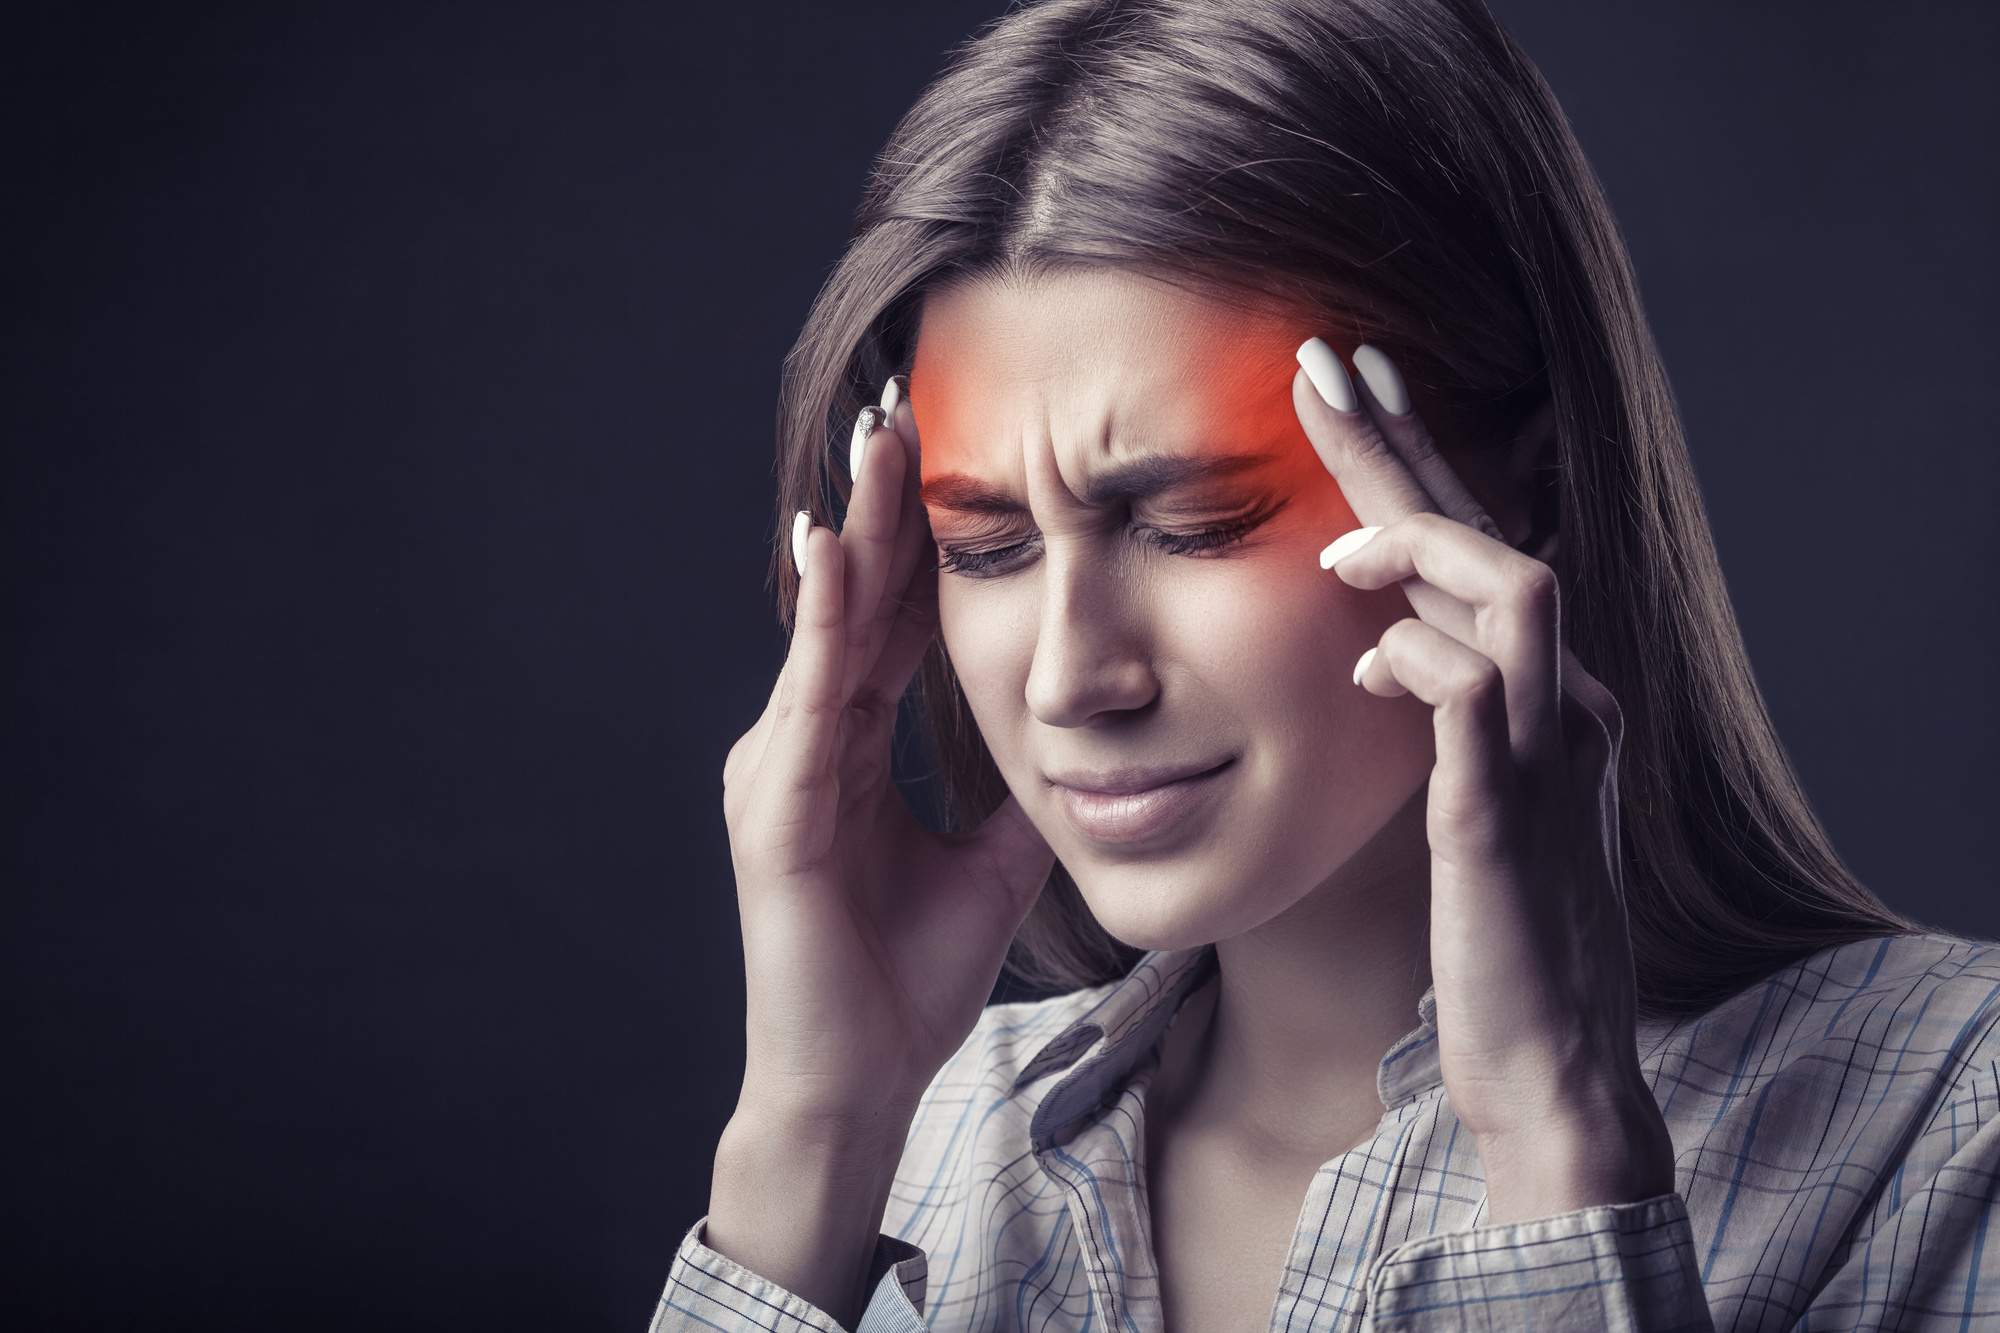 How To Get Rid of Tension Headaches